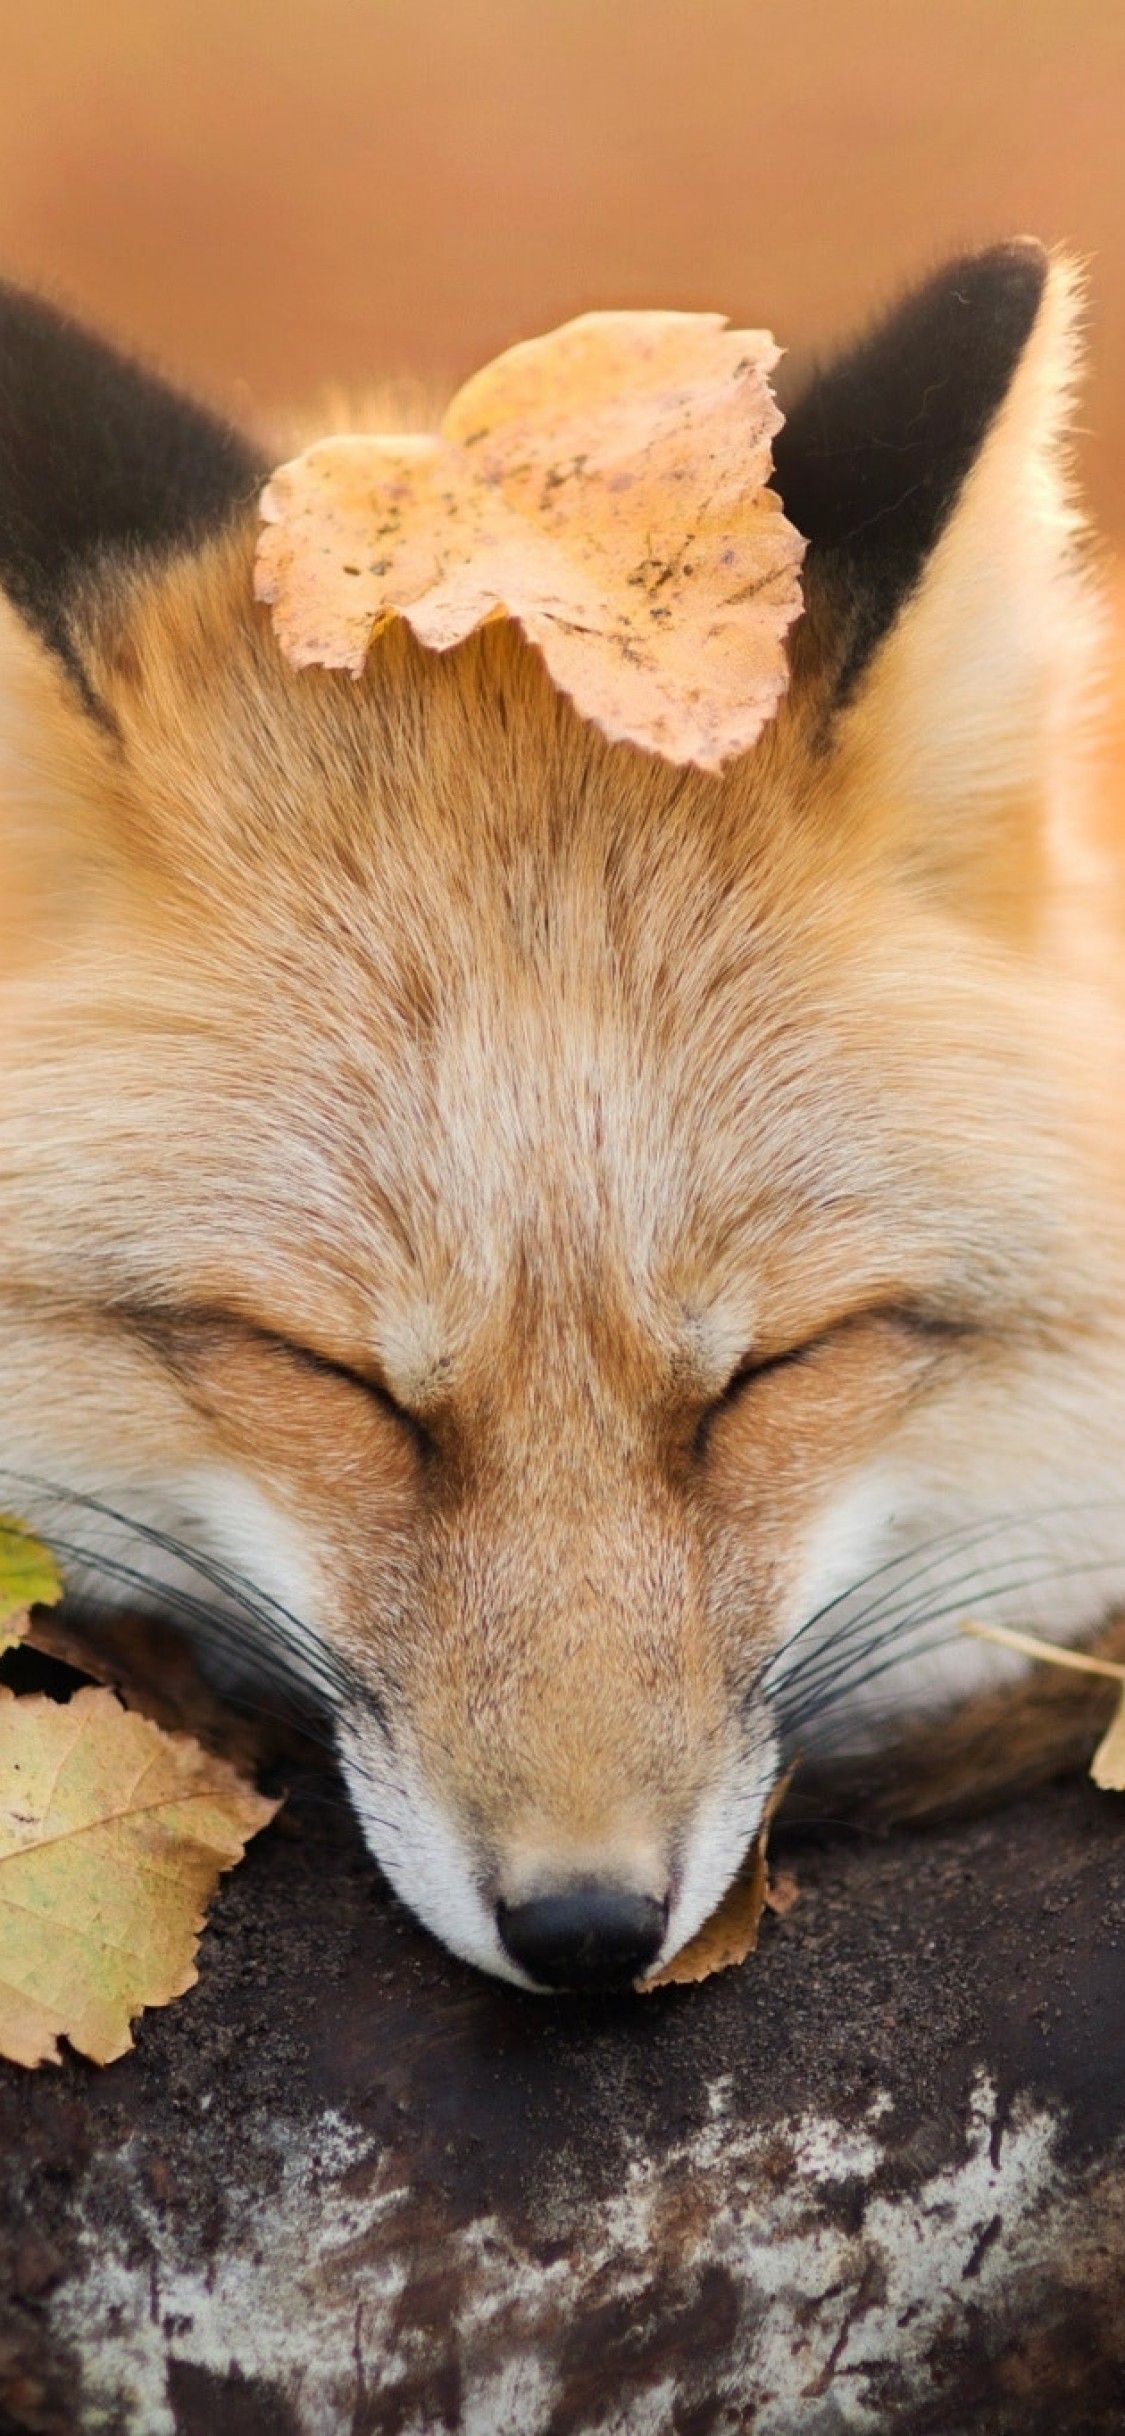 Download 1125x2436 Fox, Sleeping, Cute, Wood, Leaves, Autumn Wallpaper for iPhone X